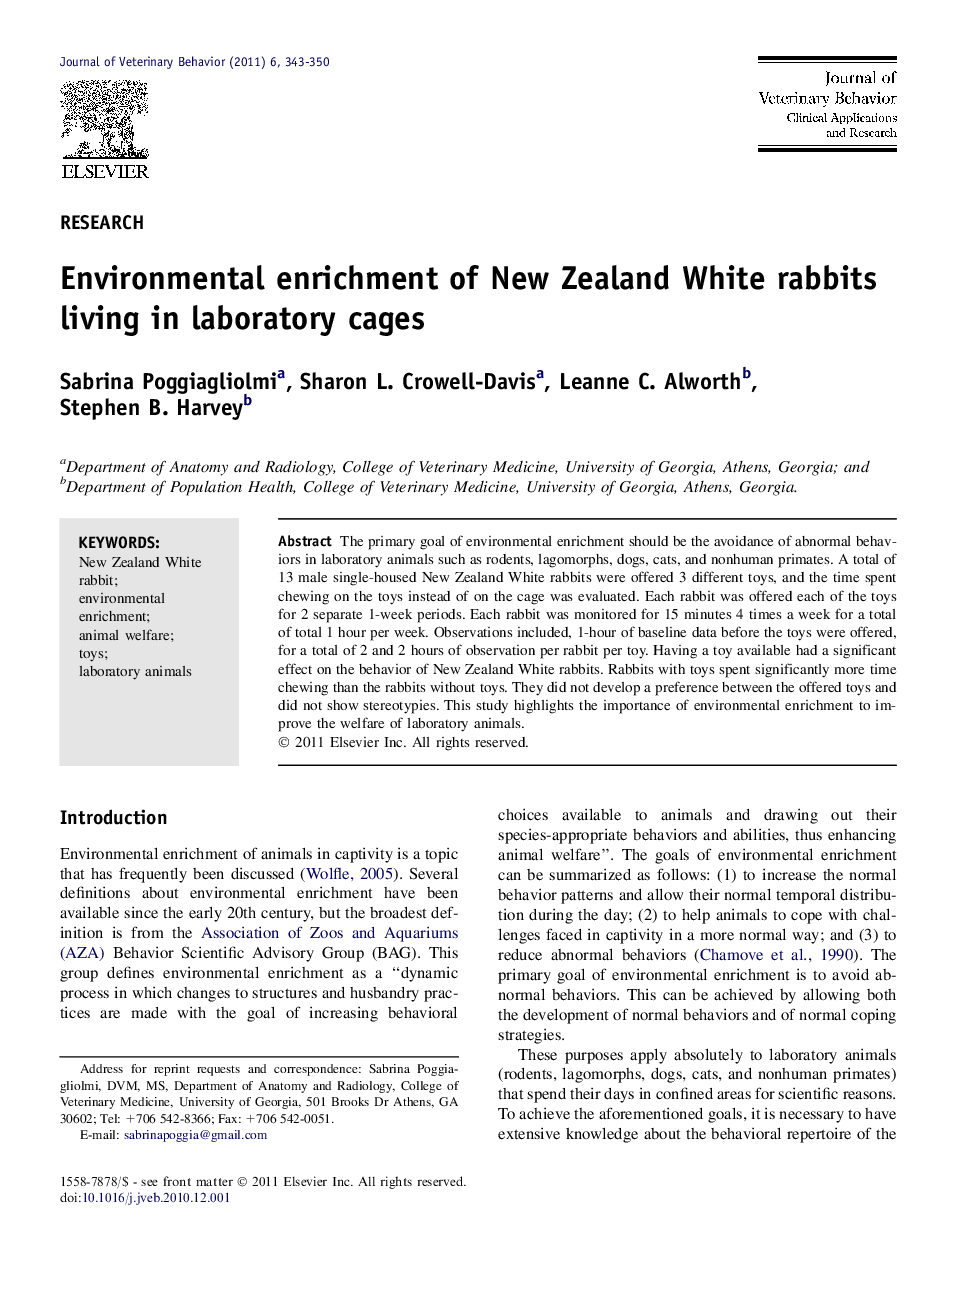 Environmental enrichment of New Zealand White rabbits living in laboratory cages